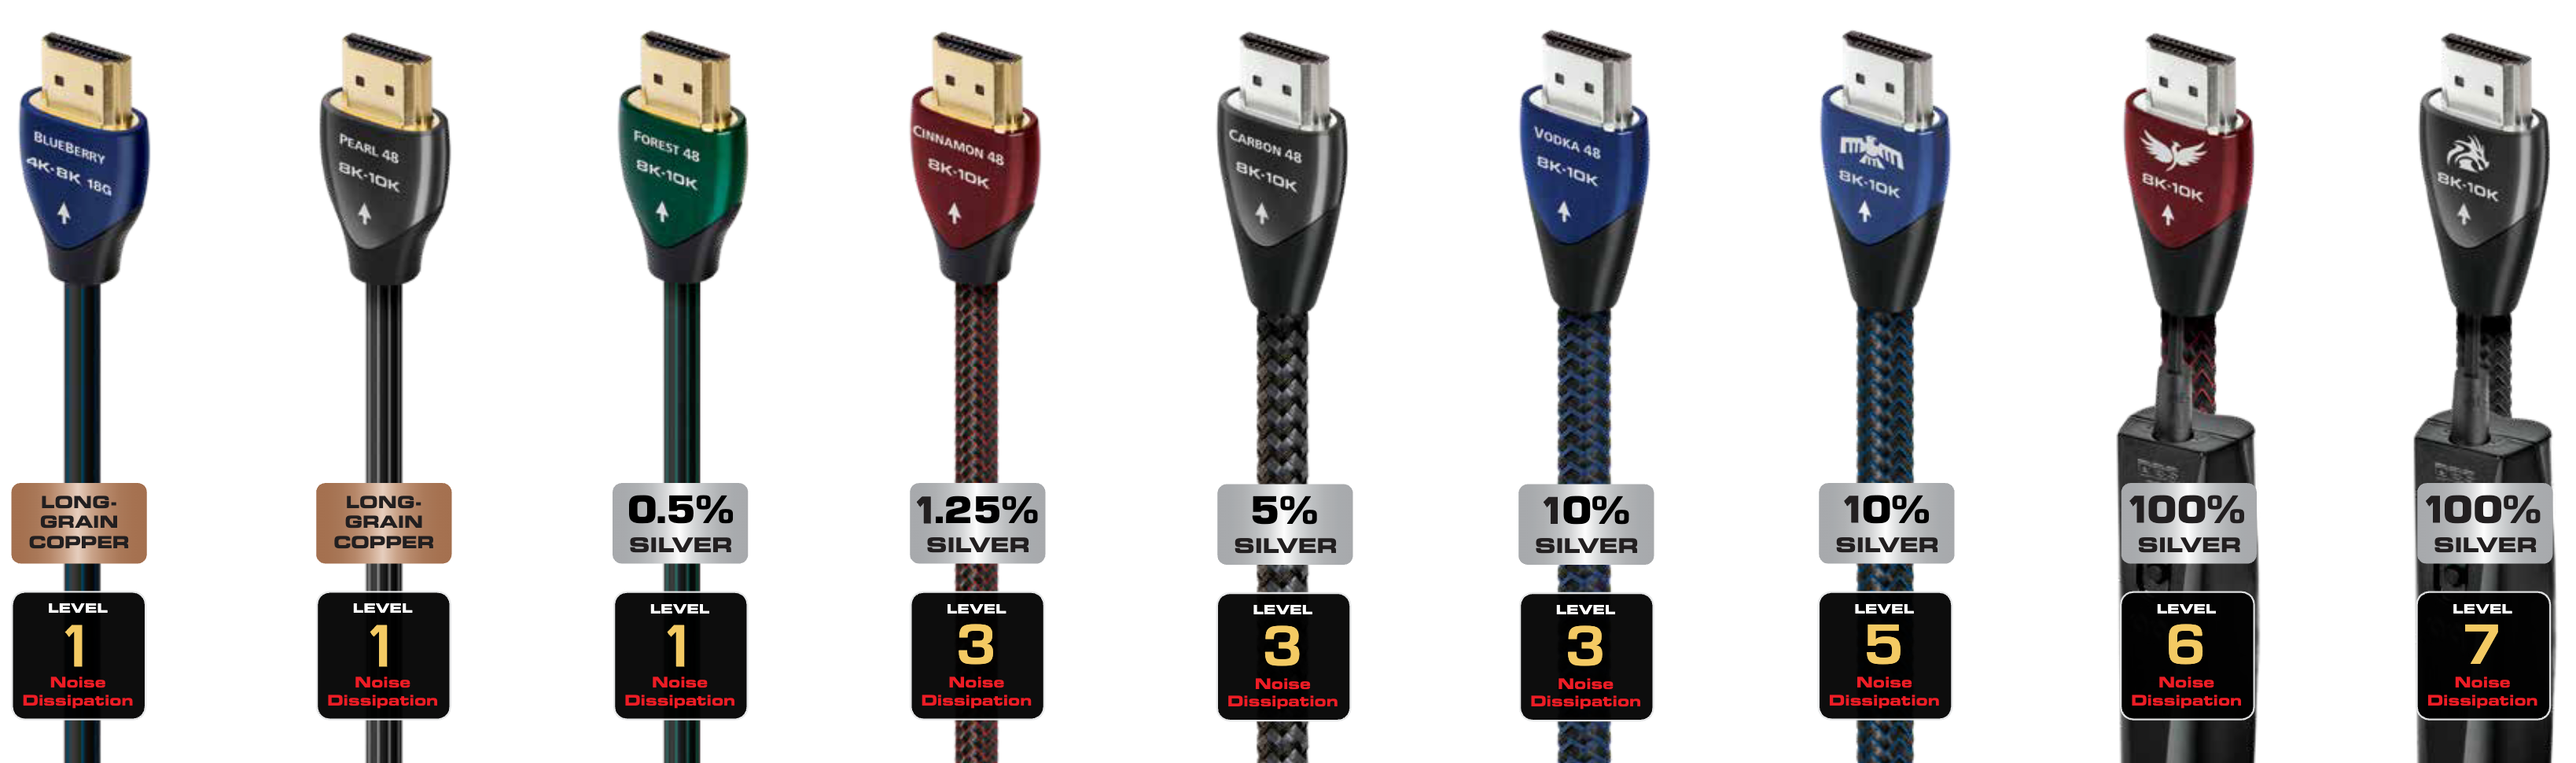 Cable HDMI Blueberry 4K/8K 18gbps eARC